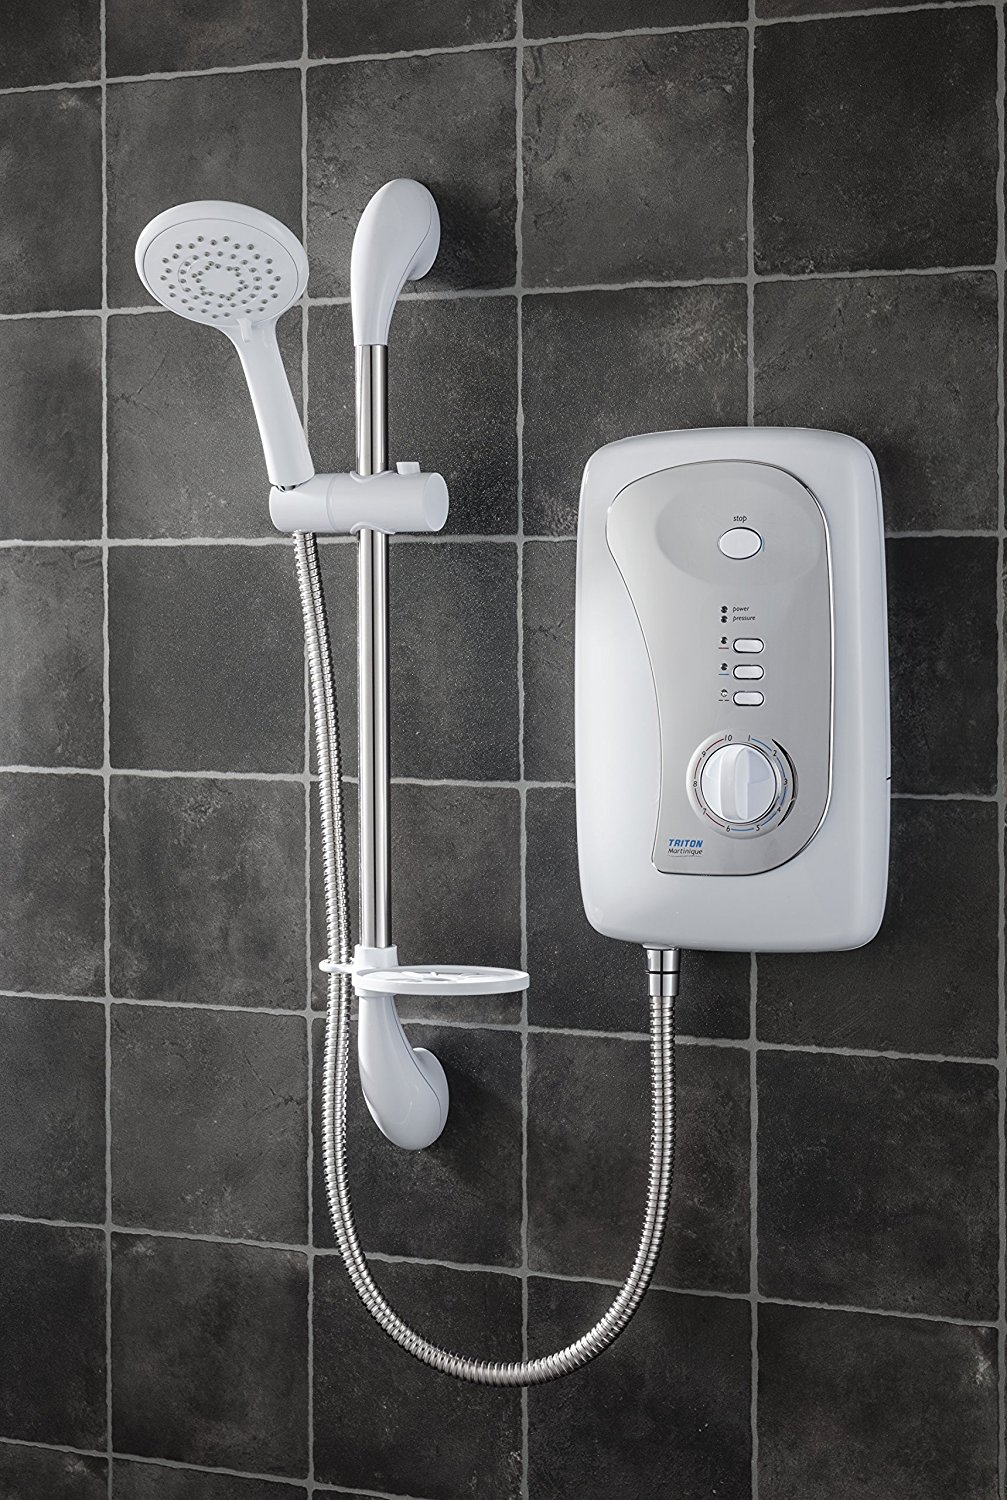 Best Electric Shower 2020 - The Ultimate Guide - Greatest Reviews